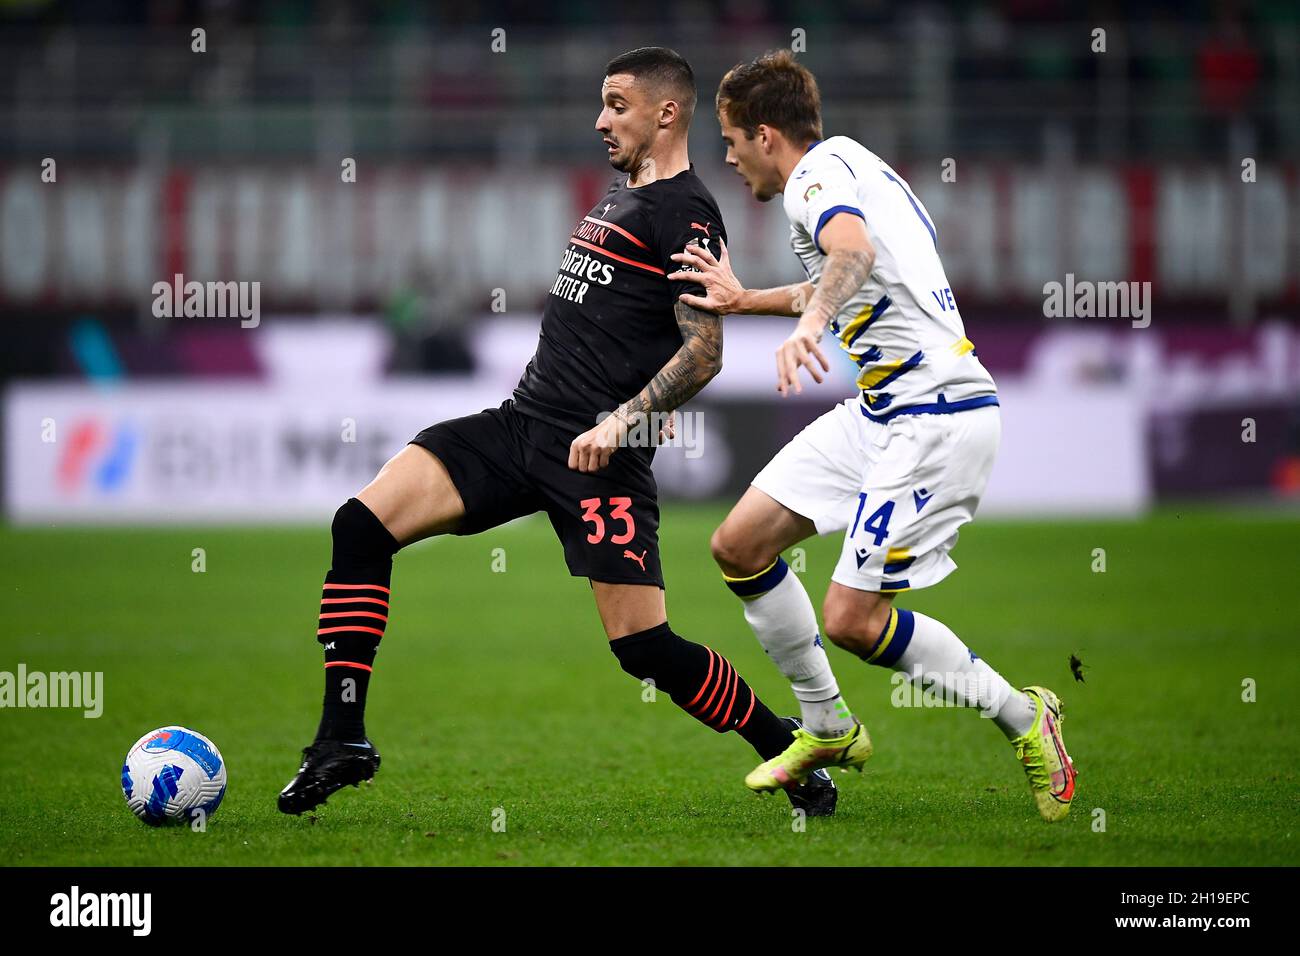 Milan, Italy. 16 October 2021. Rade Krunic (L) of AC Milan is challenged by Ivan Ilic of Hellas Verona FC during the Serie A football match between AC Milan and Hellas Verona FC. Credit: Nicolò Campo/Alamy Live News Stock Photo